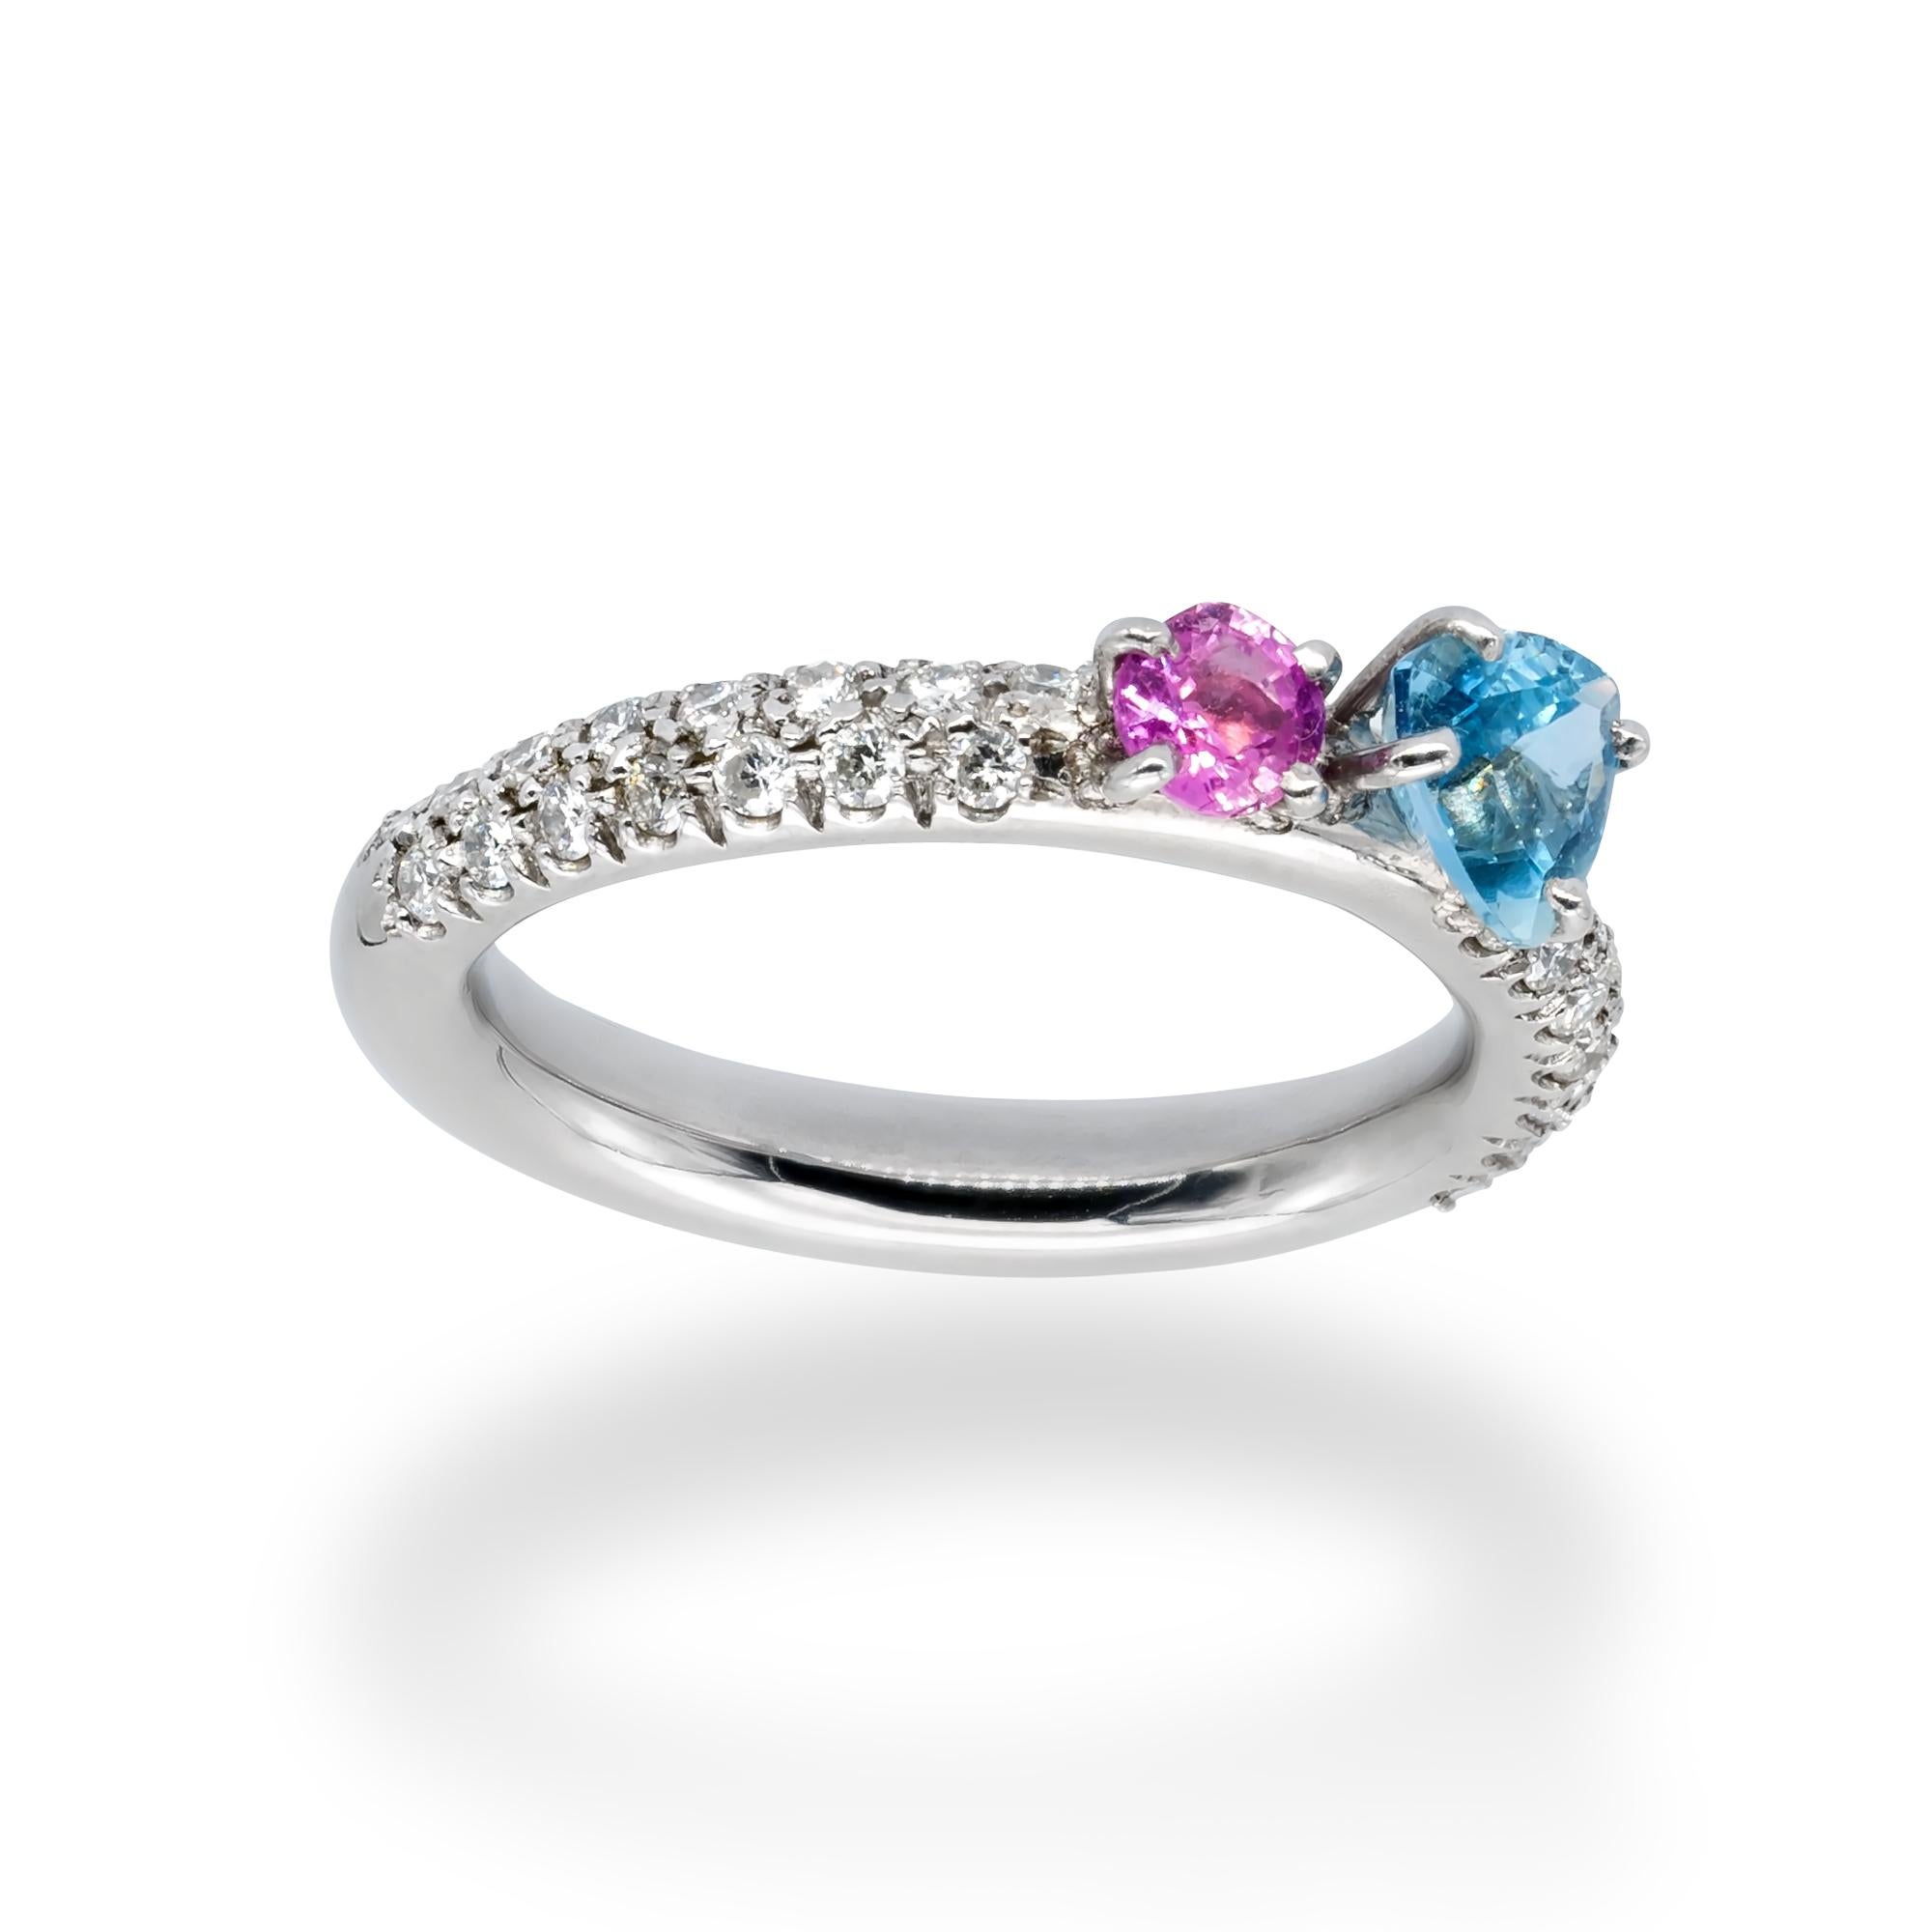 d'Avossa Rainbow Collection’s Ring, 18Kt white gold with a pavé of 0.45 cts white diamonds, 0.60 cts trillon Blue Aquamarine and 0.42 cts Pink Sapphire.
This Ring has been designed to be worn alone, or together with one or more rings from the same